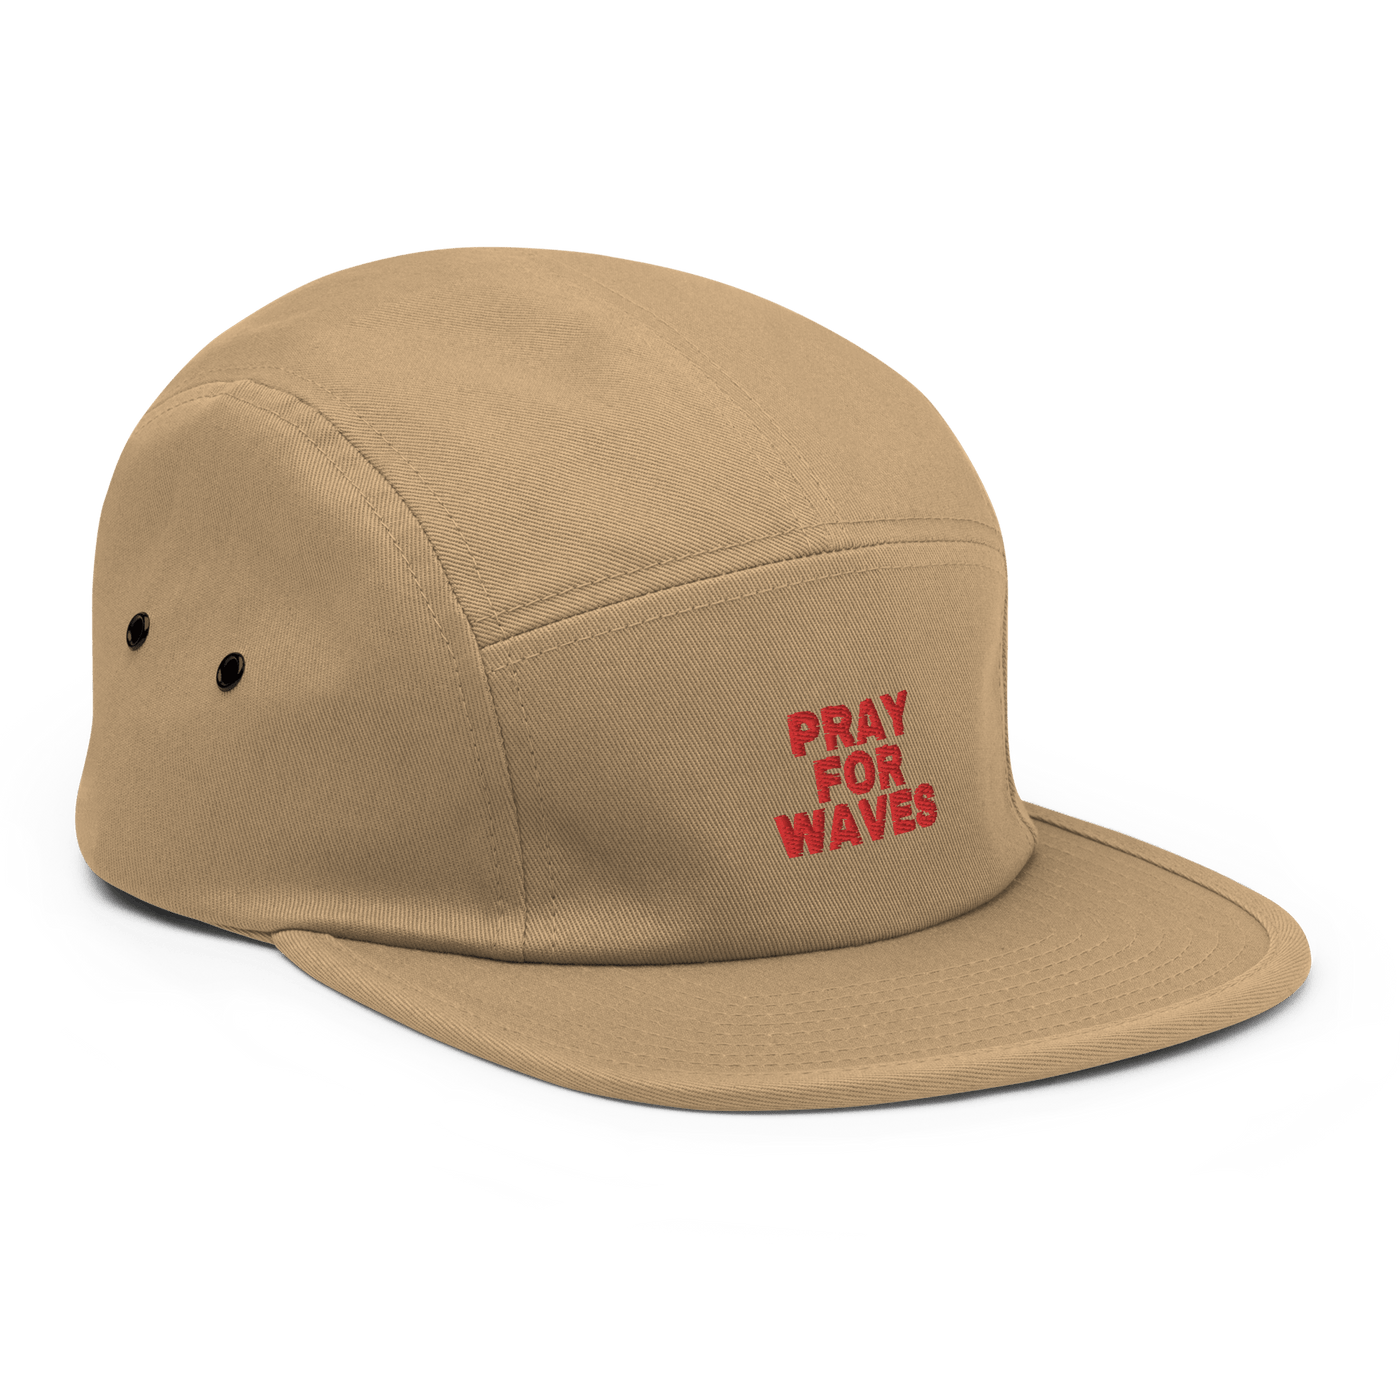 Pray For Waves Five Panel Cap - Khaki - Just Another Cap Store